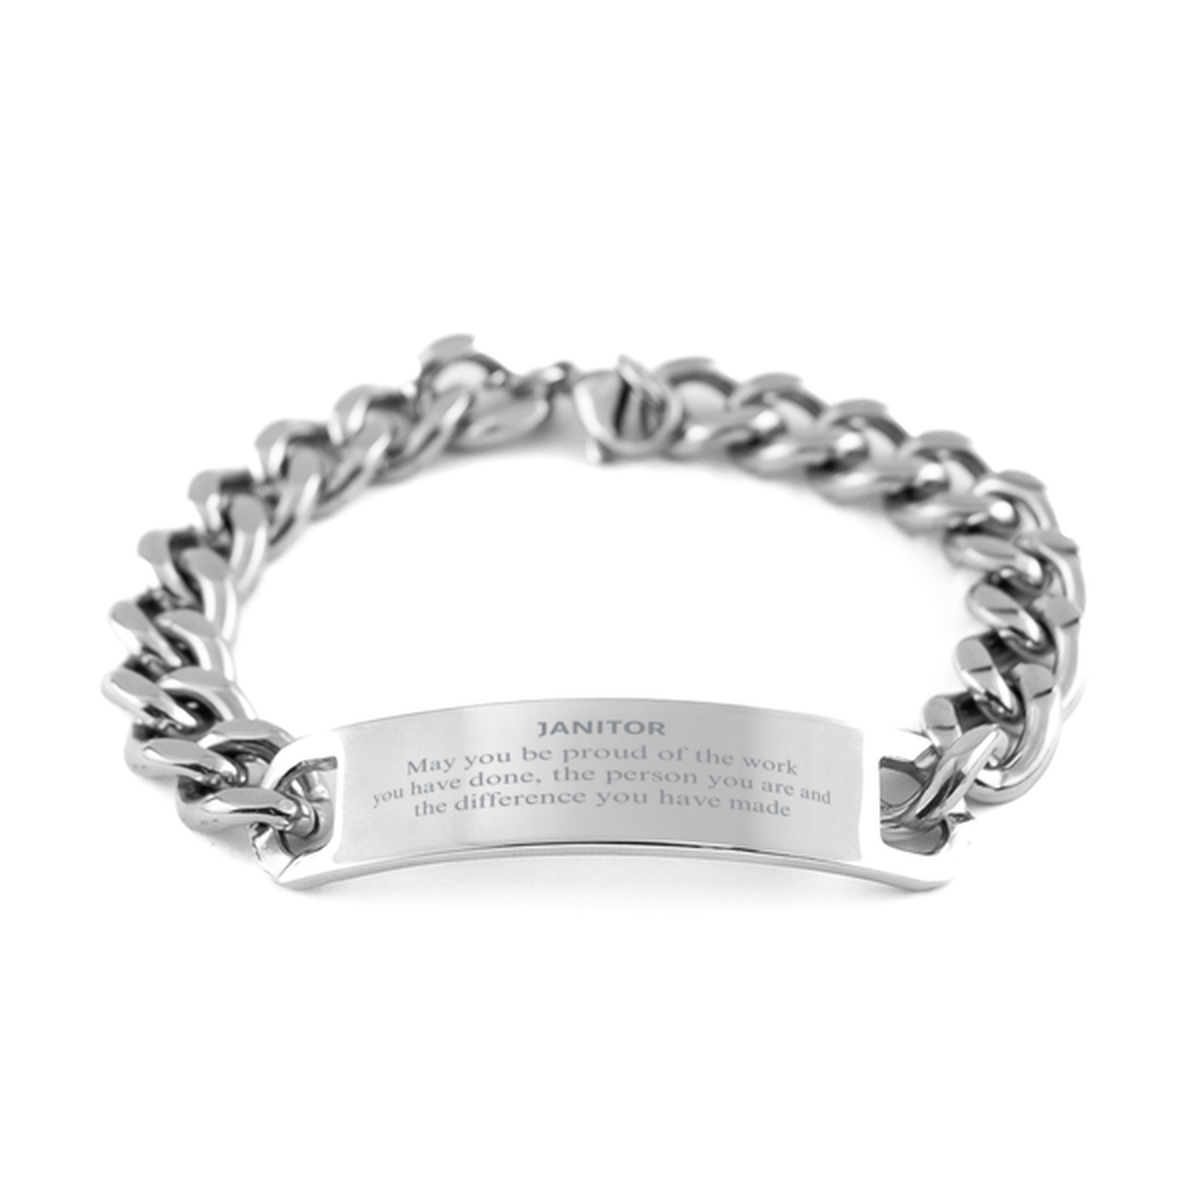 Janitor May you be proud of the work you have done, Retirement Janitor Cuban Chain Stainless Steel Bracelet for Colleague Appreciation Gifts Amazing for Janitor